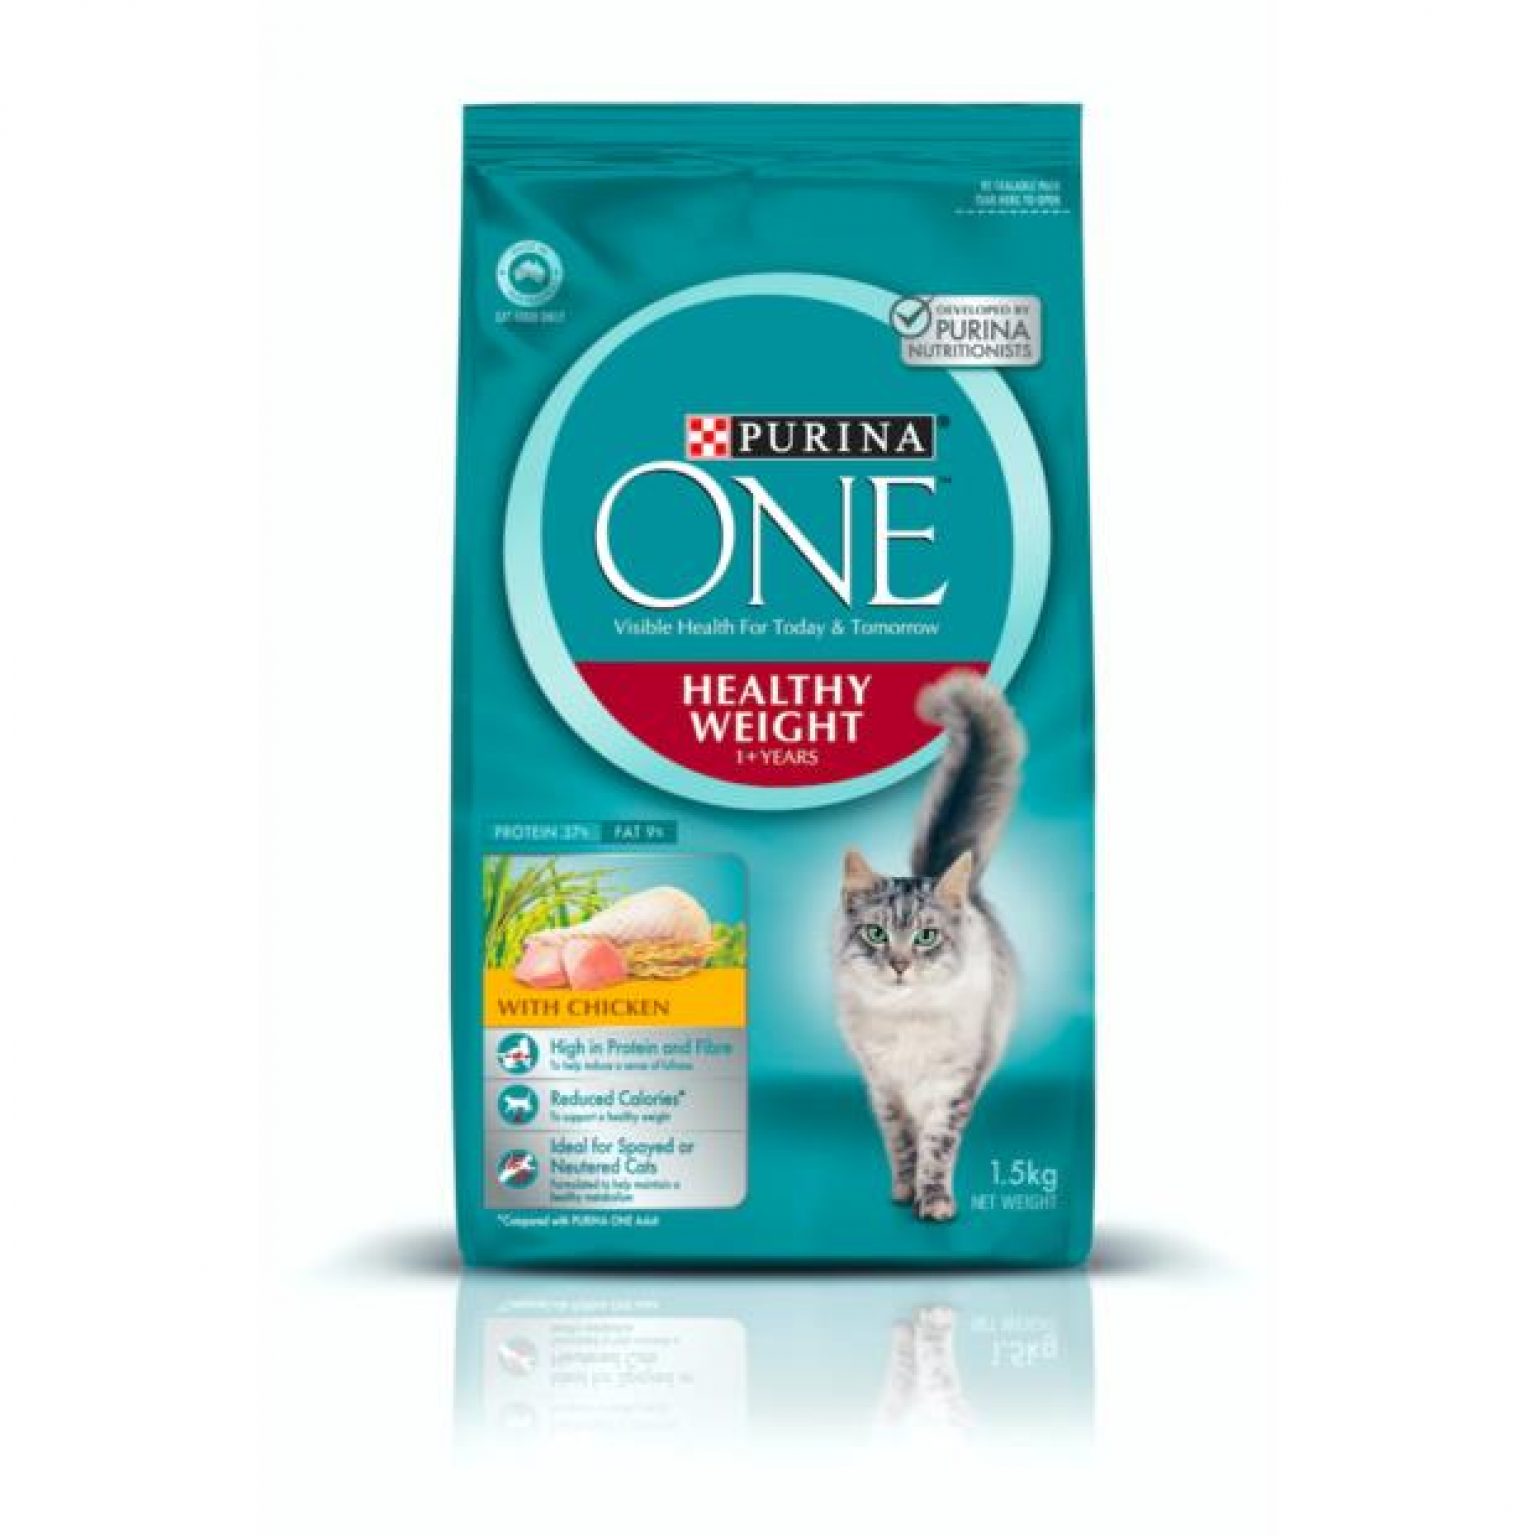 Purina One Dry Cat Food Healthy Weight And Chicken 1.5kg Pet Food